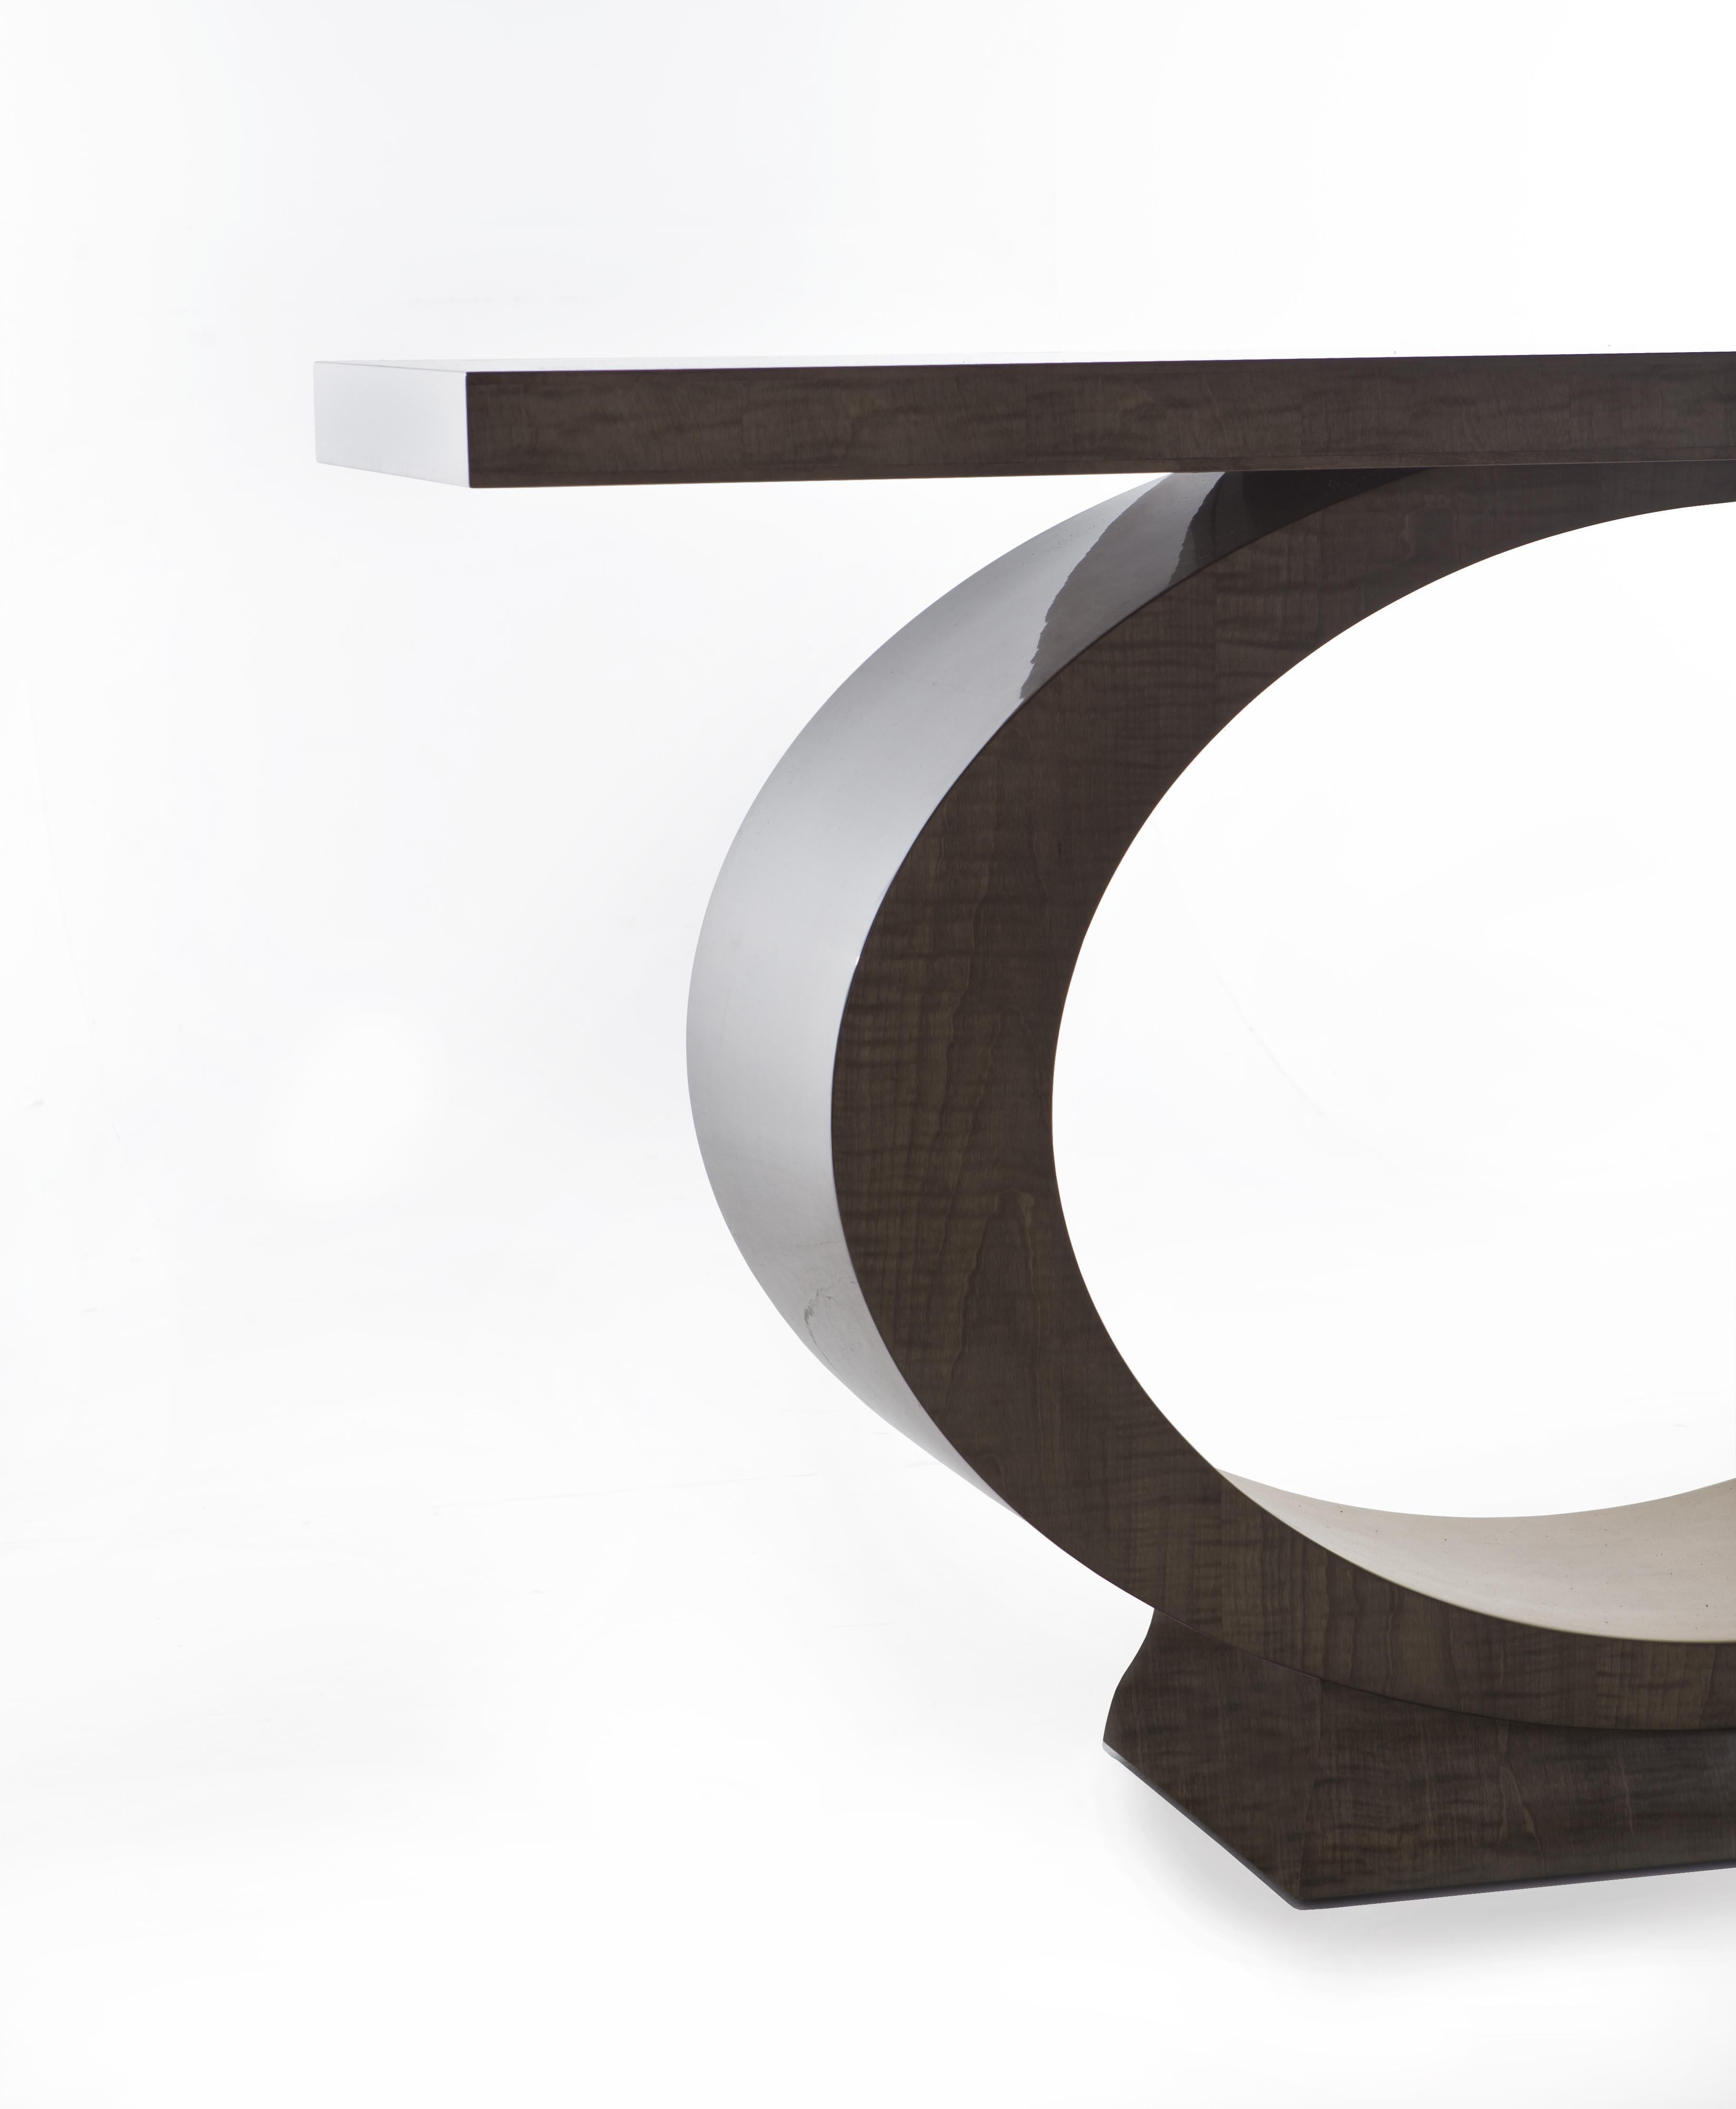 Dyed Davidson's Modern, Mandarin Console Table, in Sycamore Dusk and Moon Gold Leaf